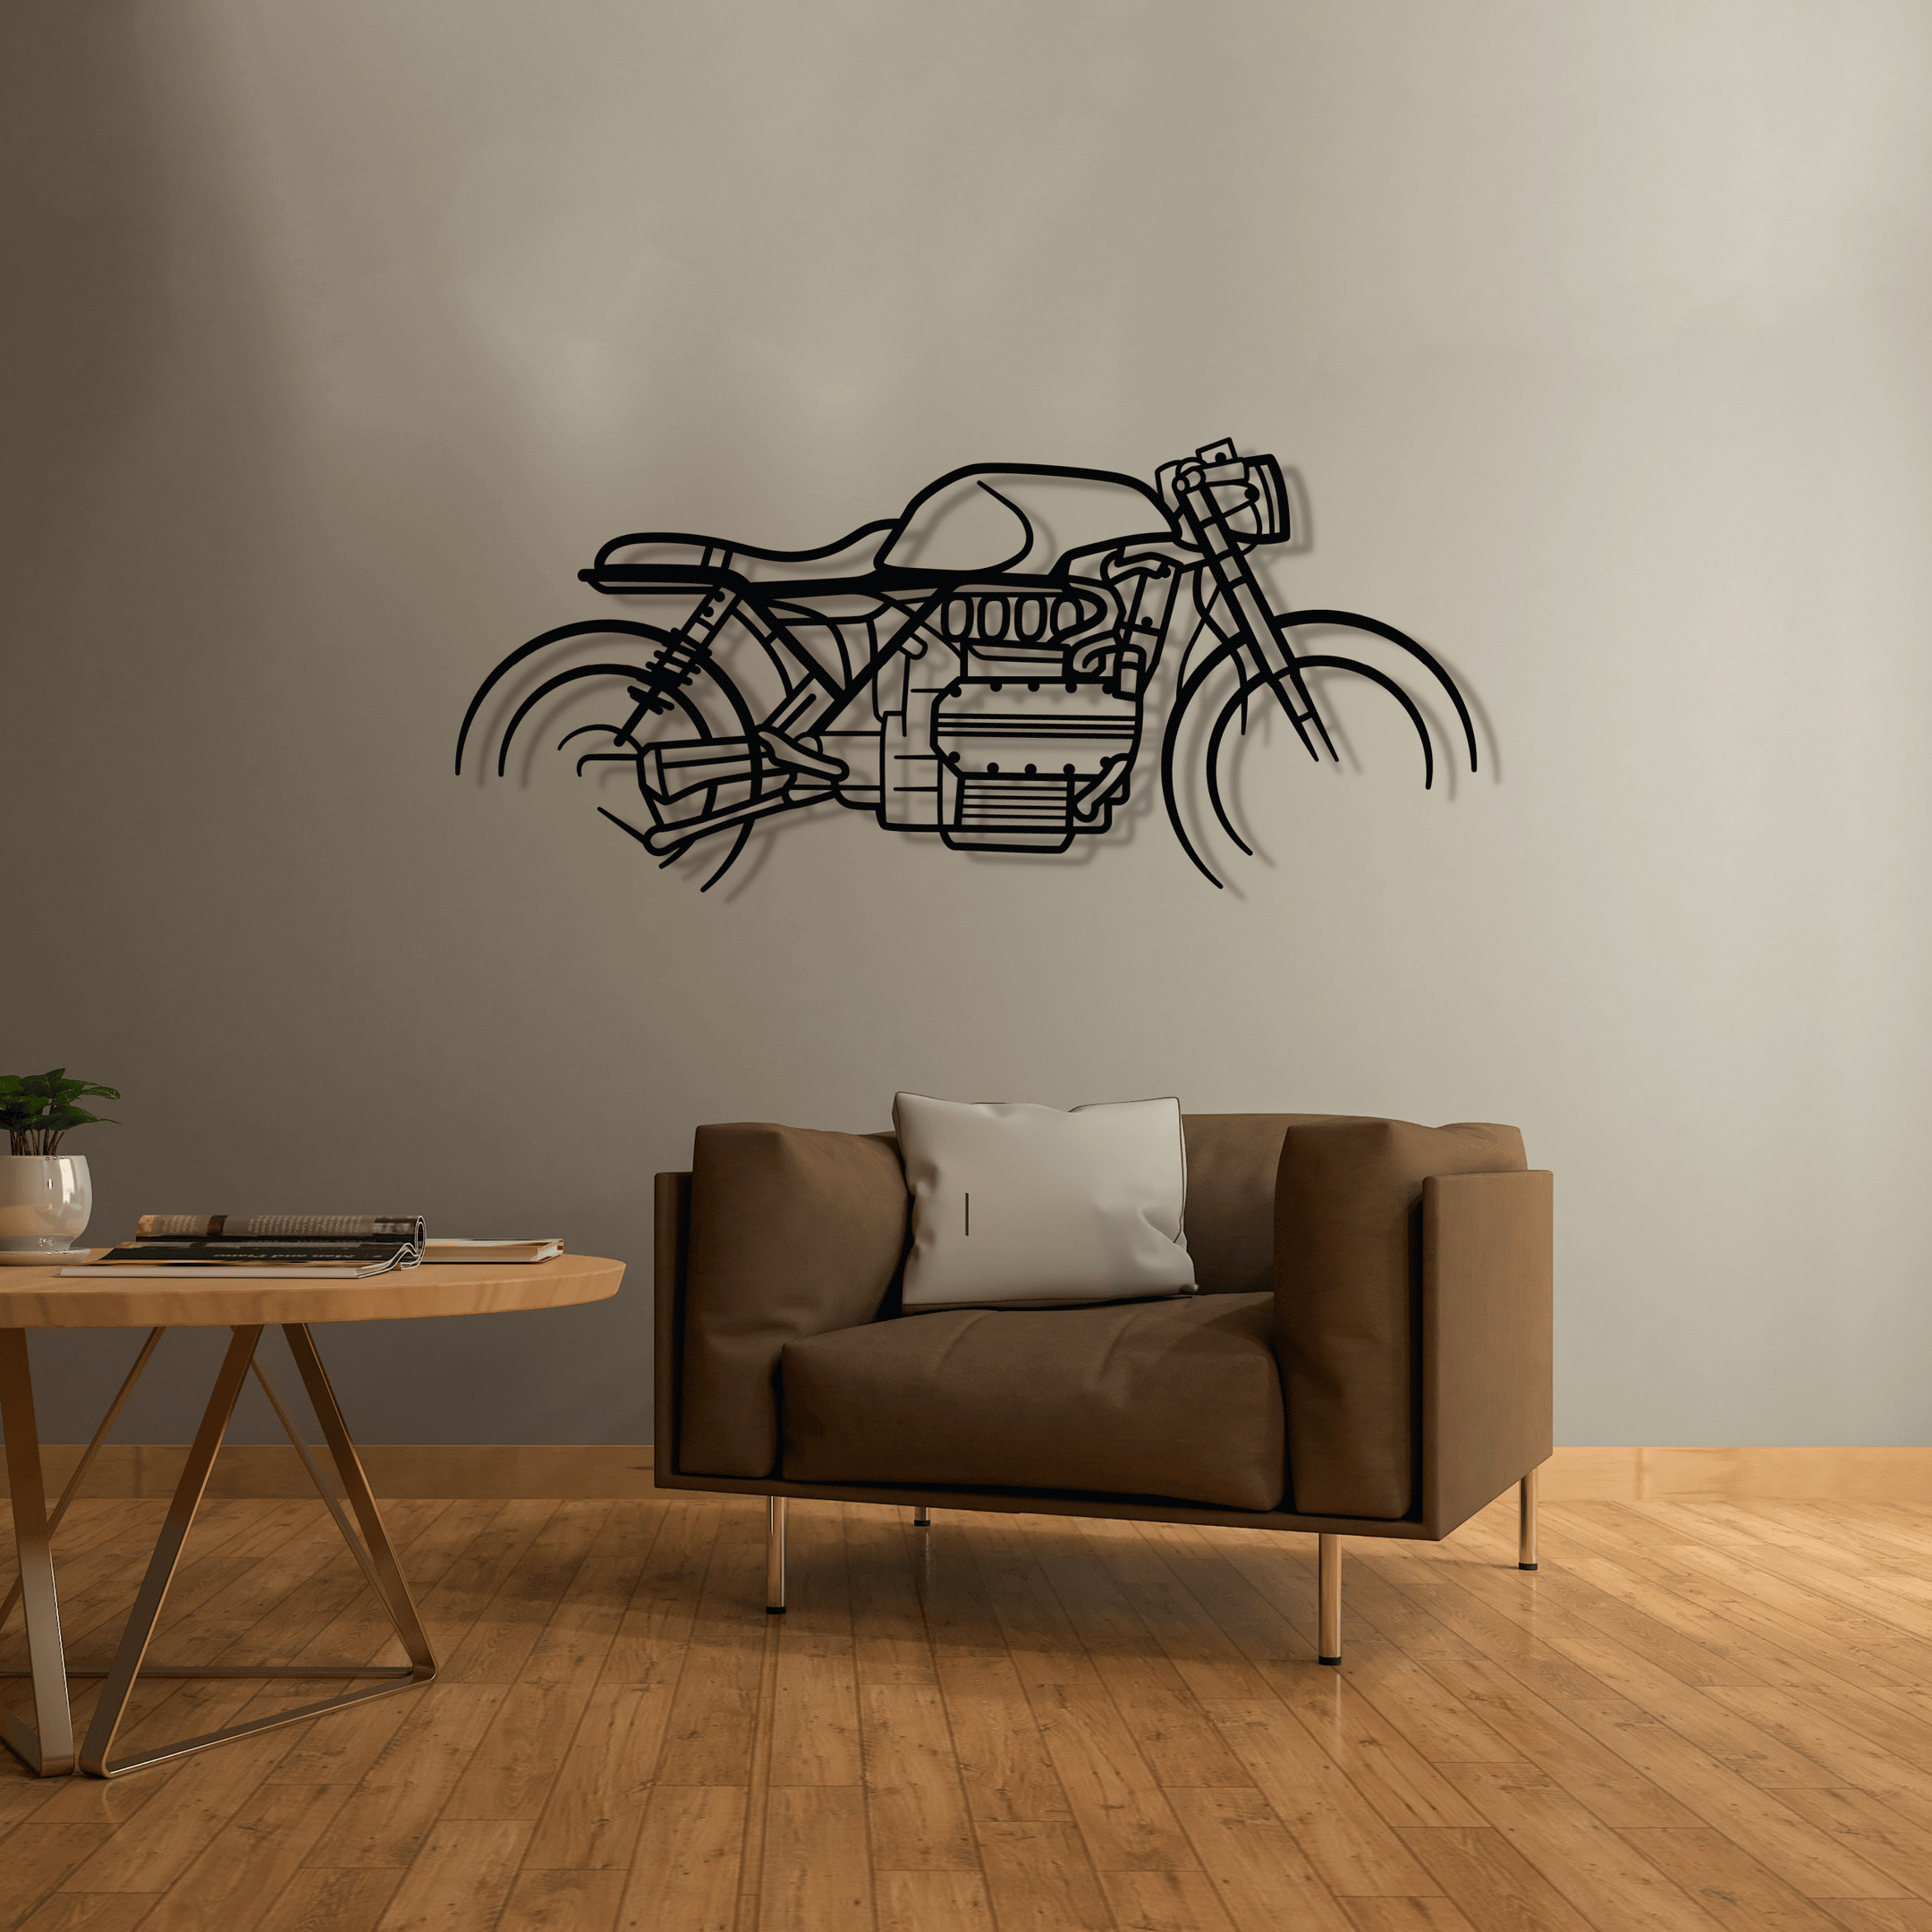 K1100 Cafe Racer Metal Silhouette Wall Art Active, Custom Metal Sport Car Silhouette Wall Art - Garage Wall Decor Gift For Him